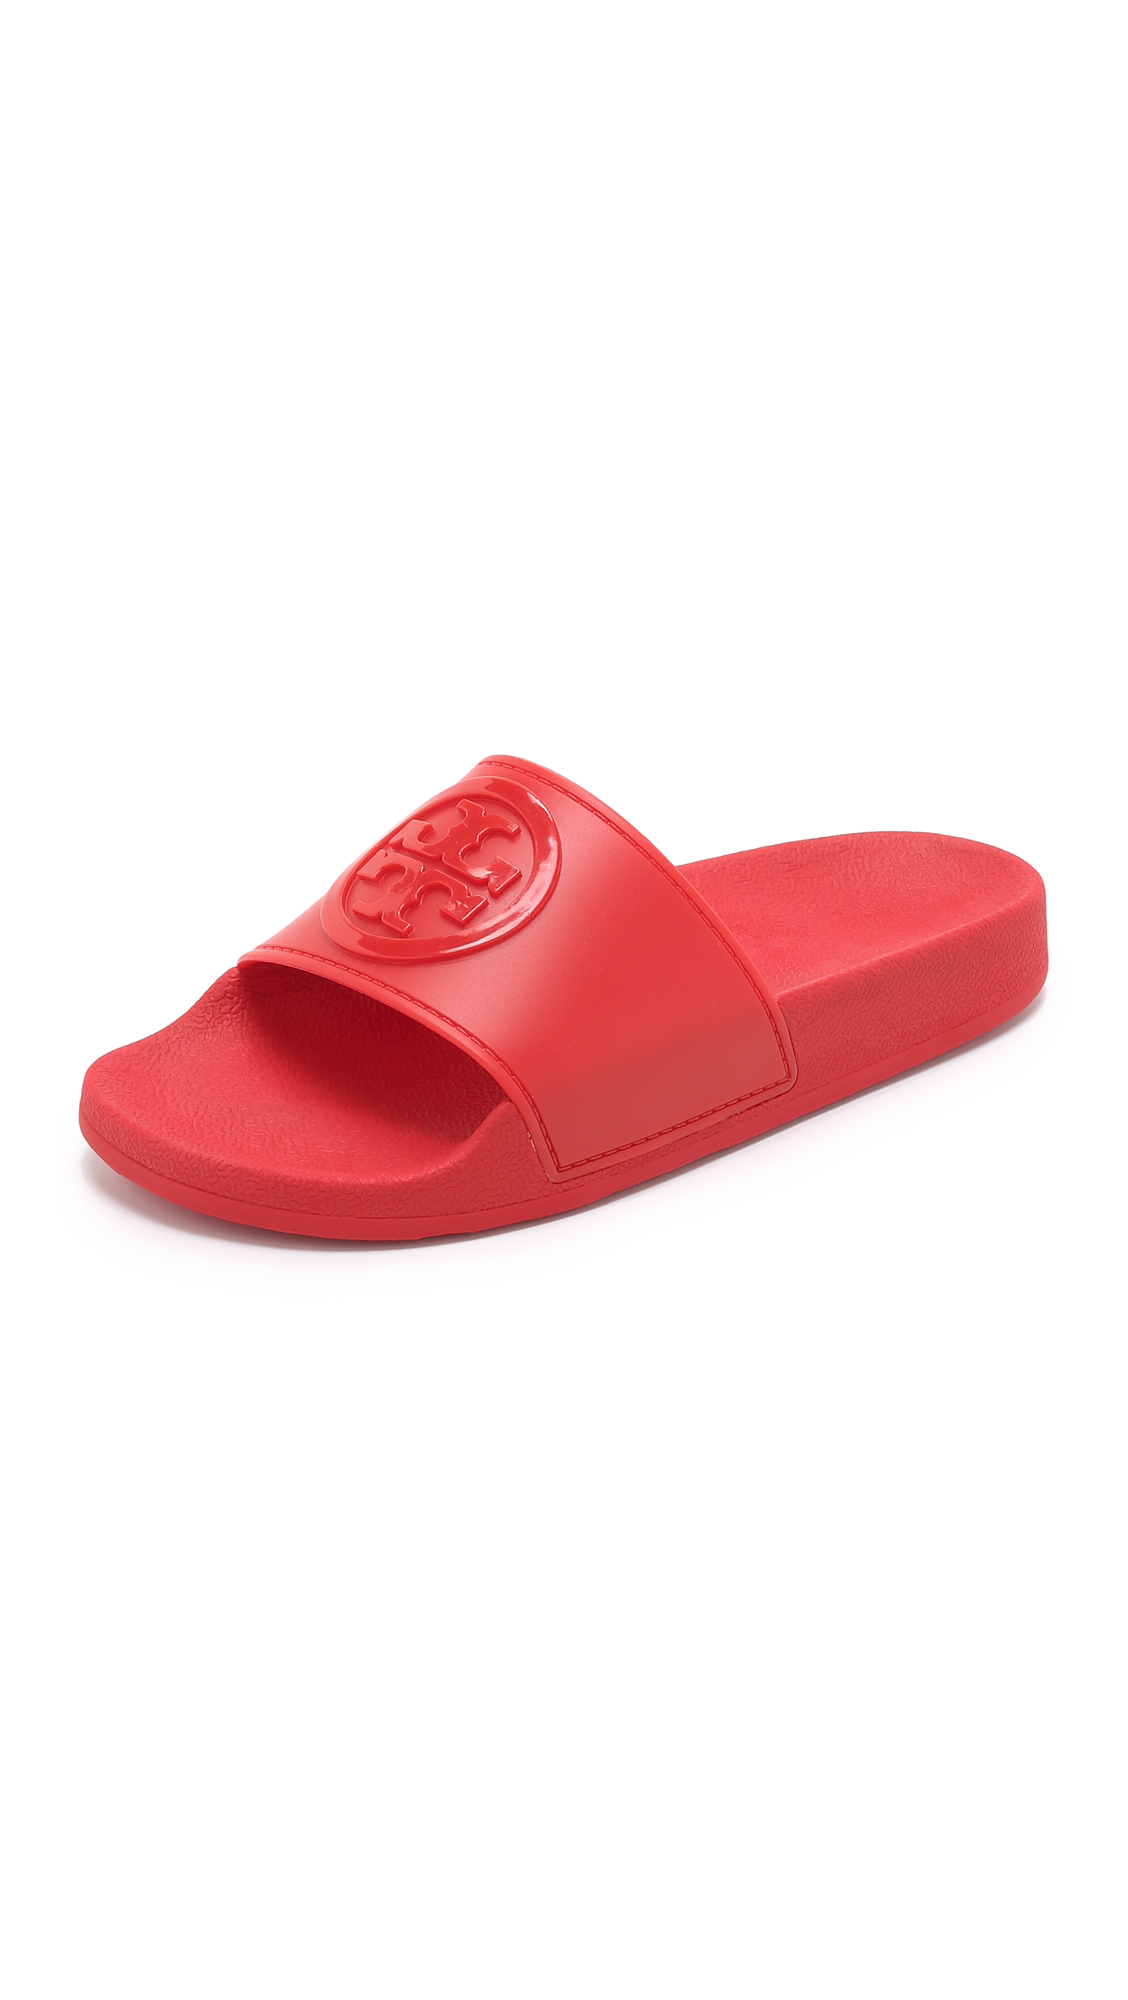 Tory Burch Jelly Flat Slides in Red - Lyst